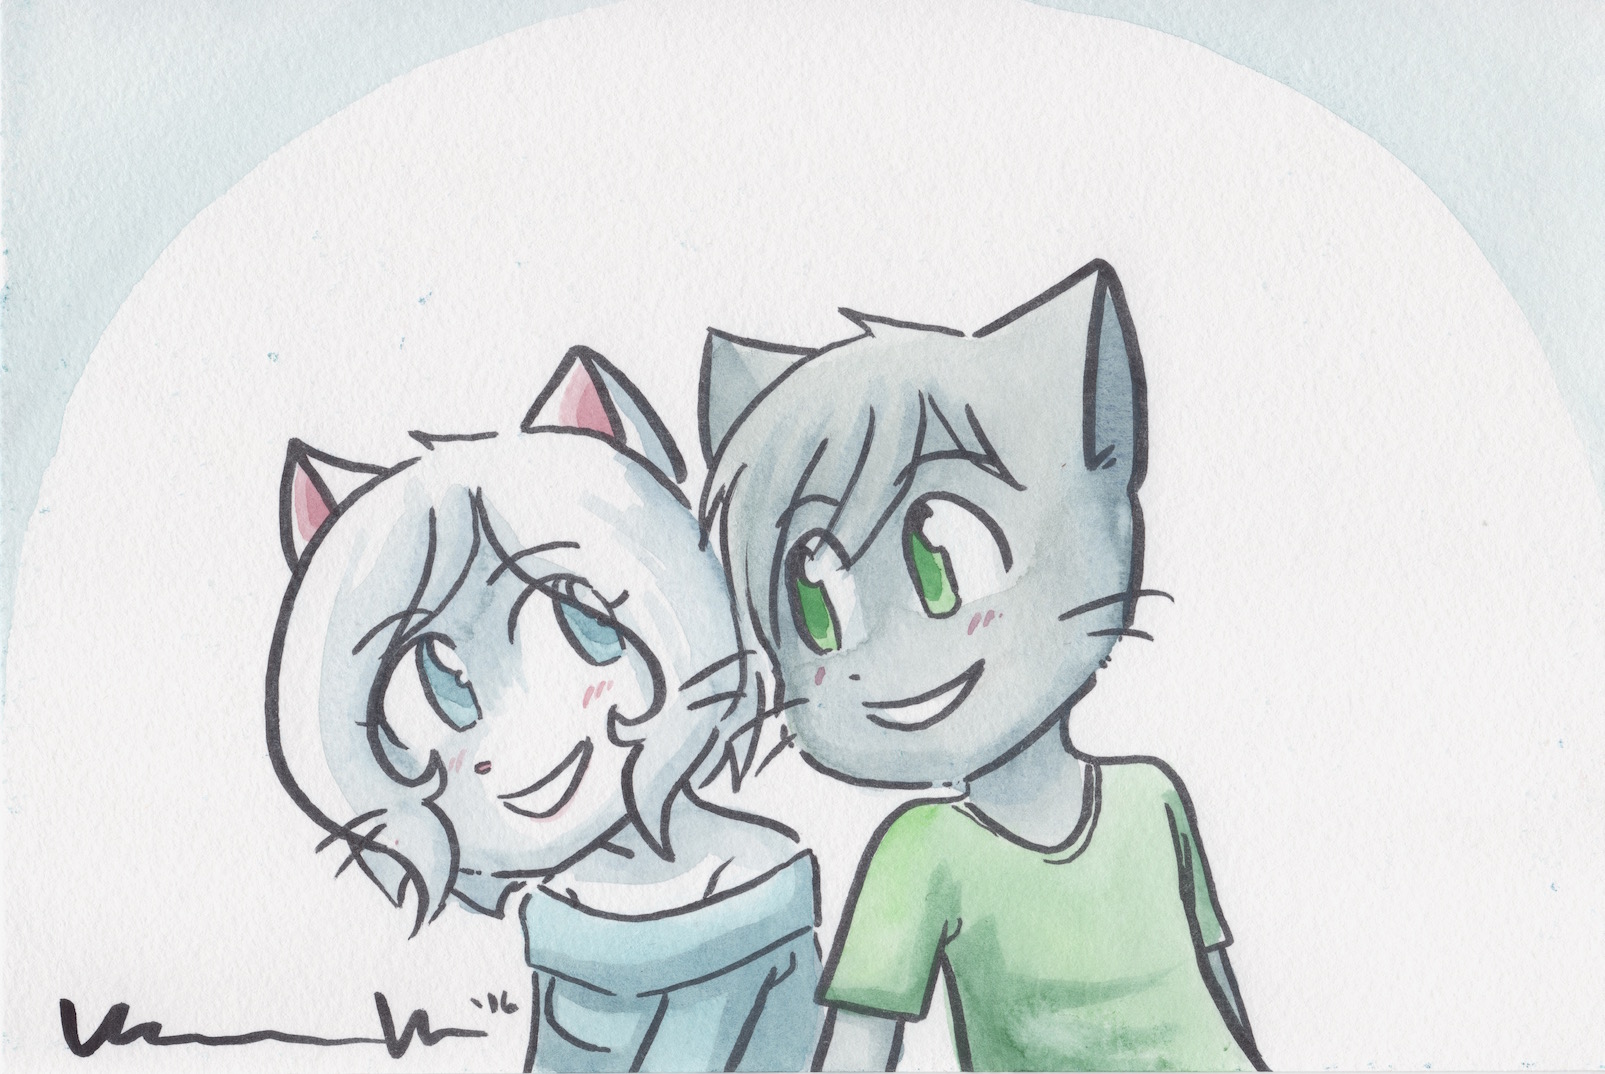 Candybooru image #11272, tagged with Adult_Lucy Adult_Mike Lucy Mike MikexLucy Taeshi_(Artist) commission watercolor